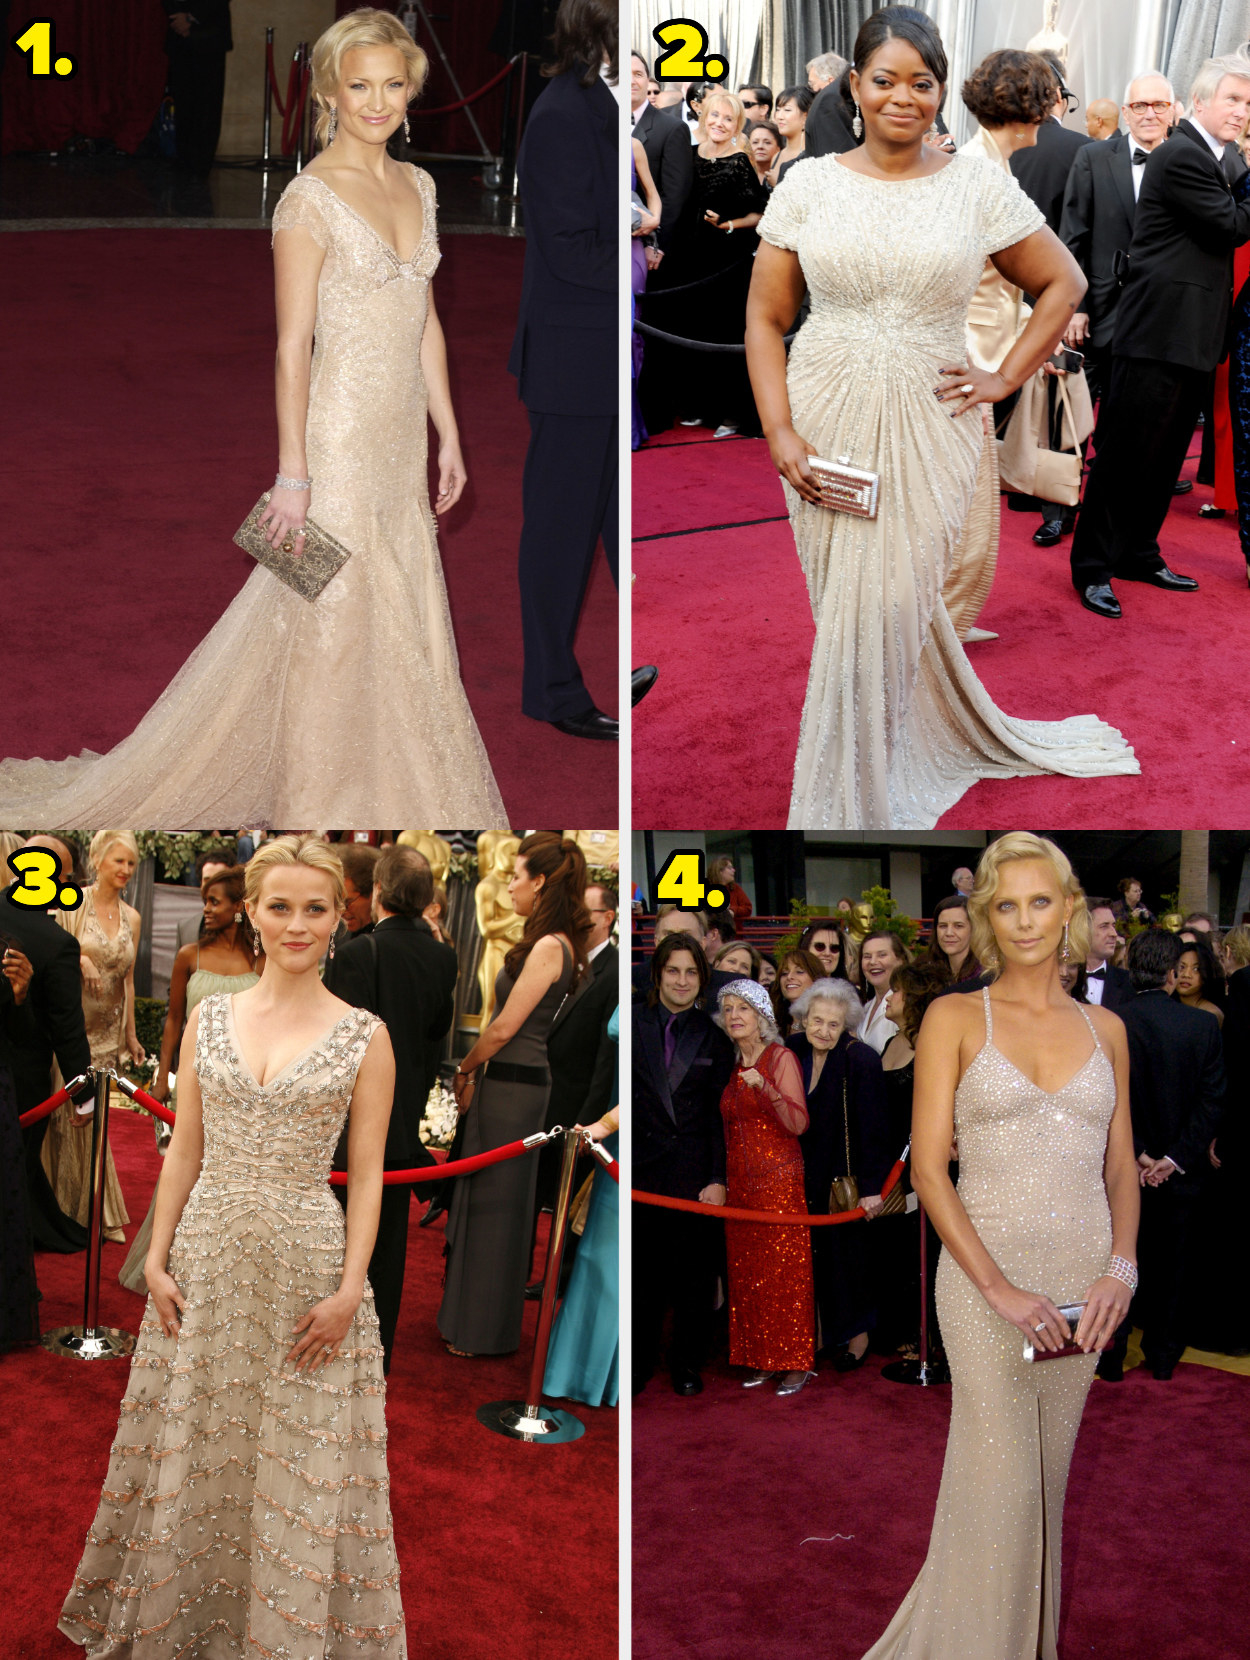 1. Kate Hudson wears a shimmering gown. 2. Octavia Spencer wears a shortsleeved gown. 3. Reese Witherspoon wears a tea length gown with silver detailing 4. Charlize Theron wears a halter gown with diamonds